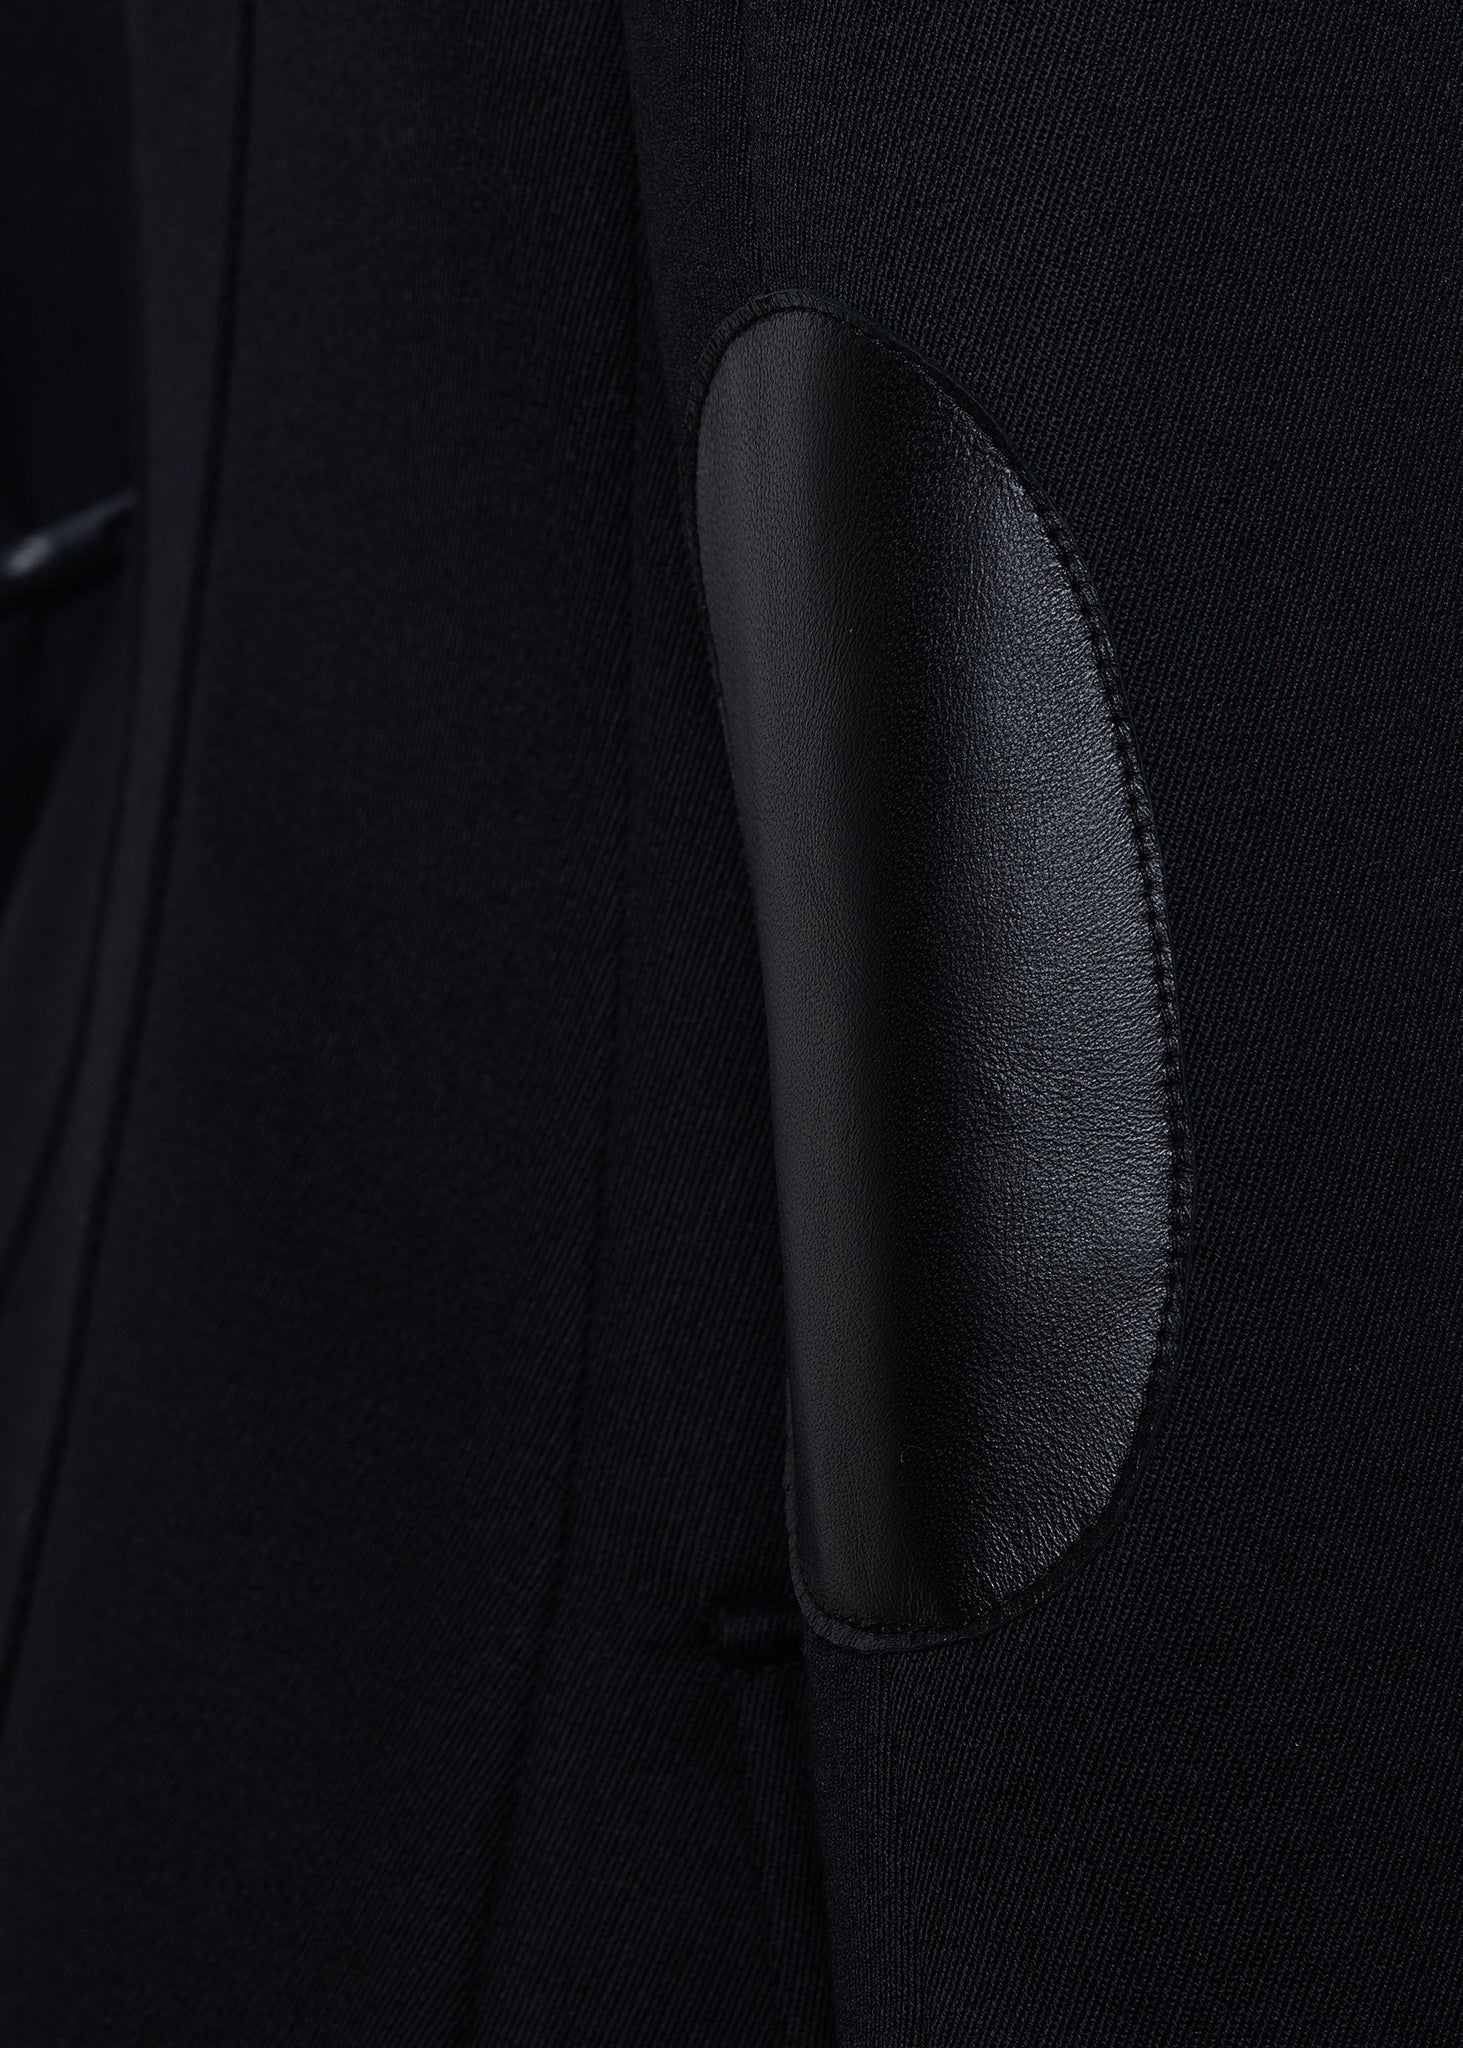 leather elbow patch on relaxed fit single breasted blazer breasted blazer in black with patch pockets and tonal black leather elbow patches and collar